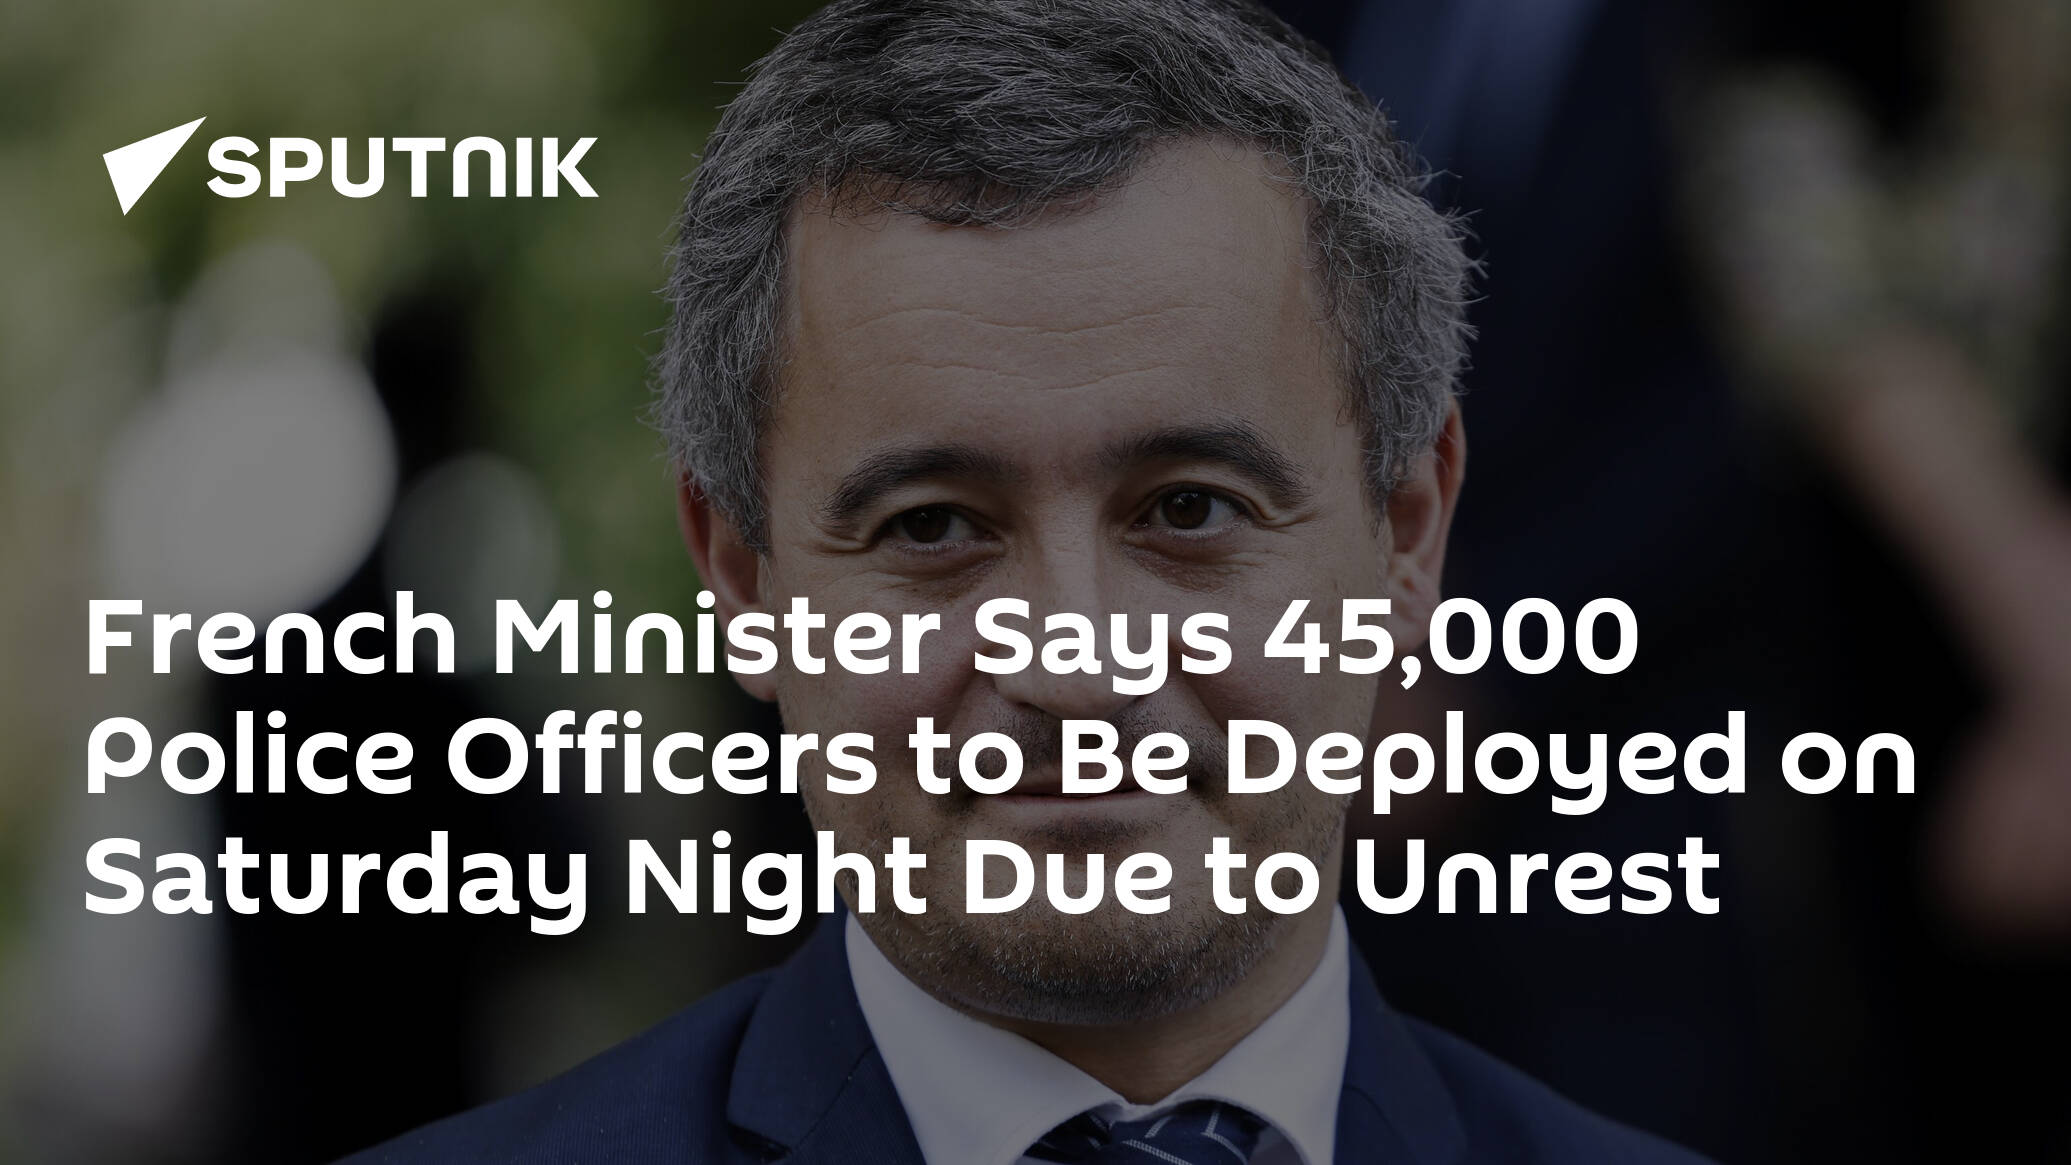 French Minister Says 45,000 Police Officers to Be Deployed on Saturday Night Due to Unrest